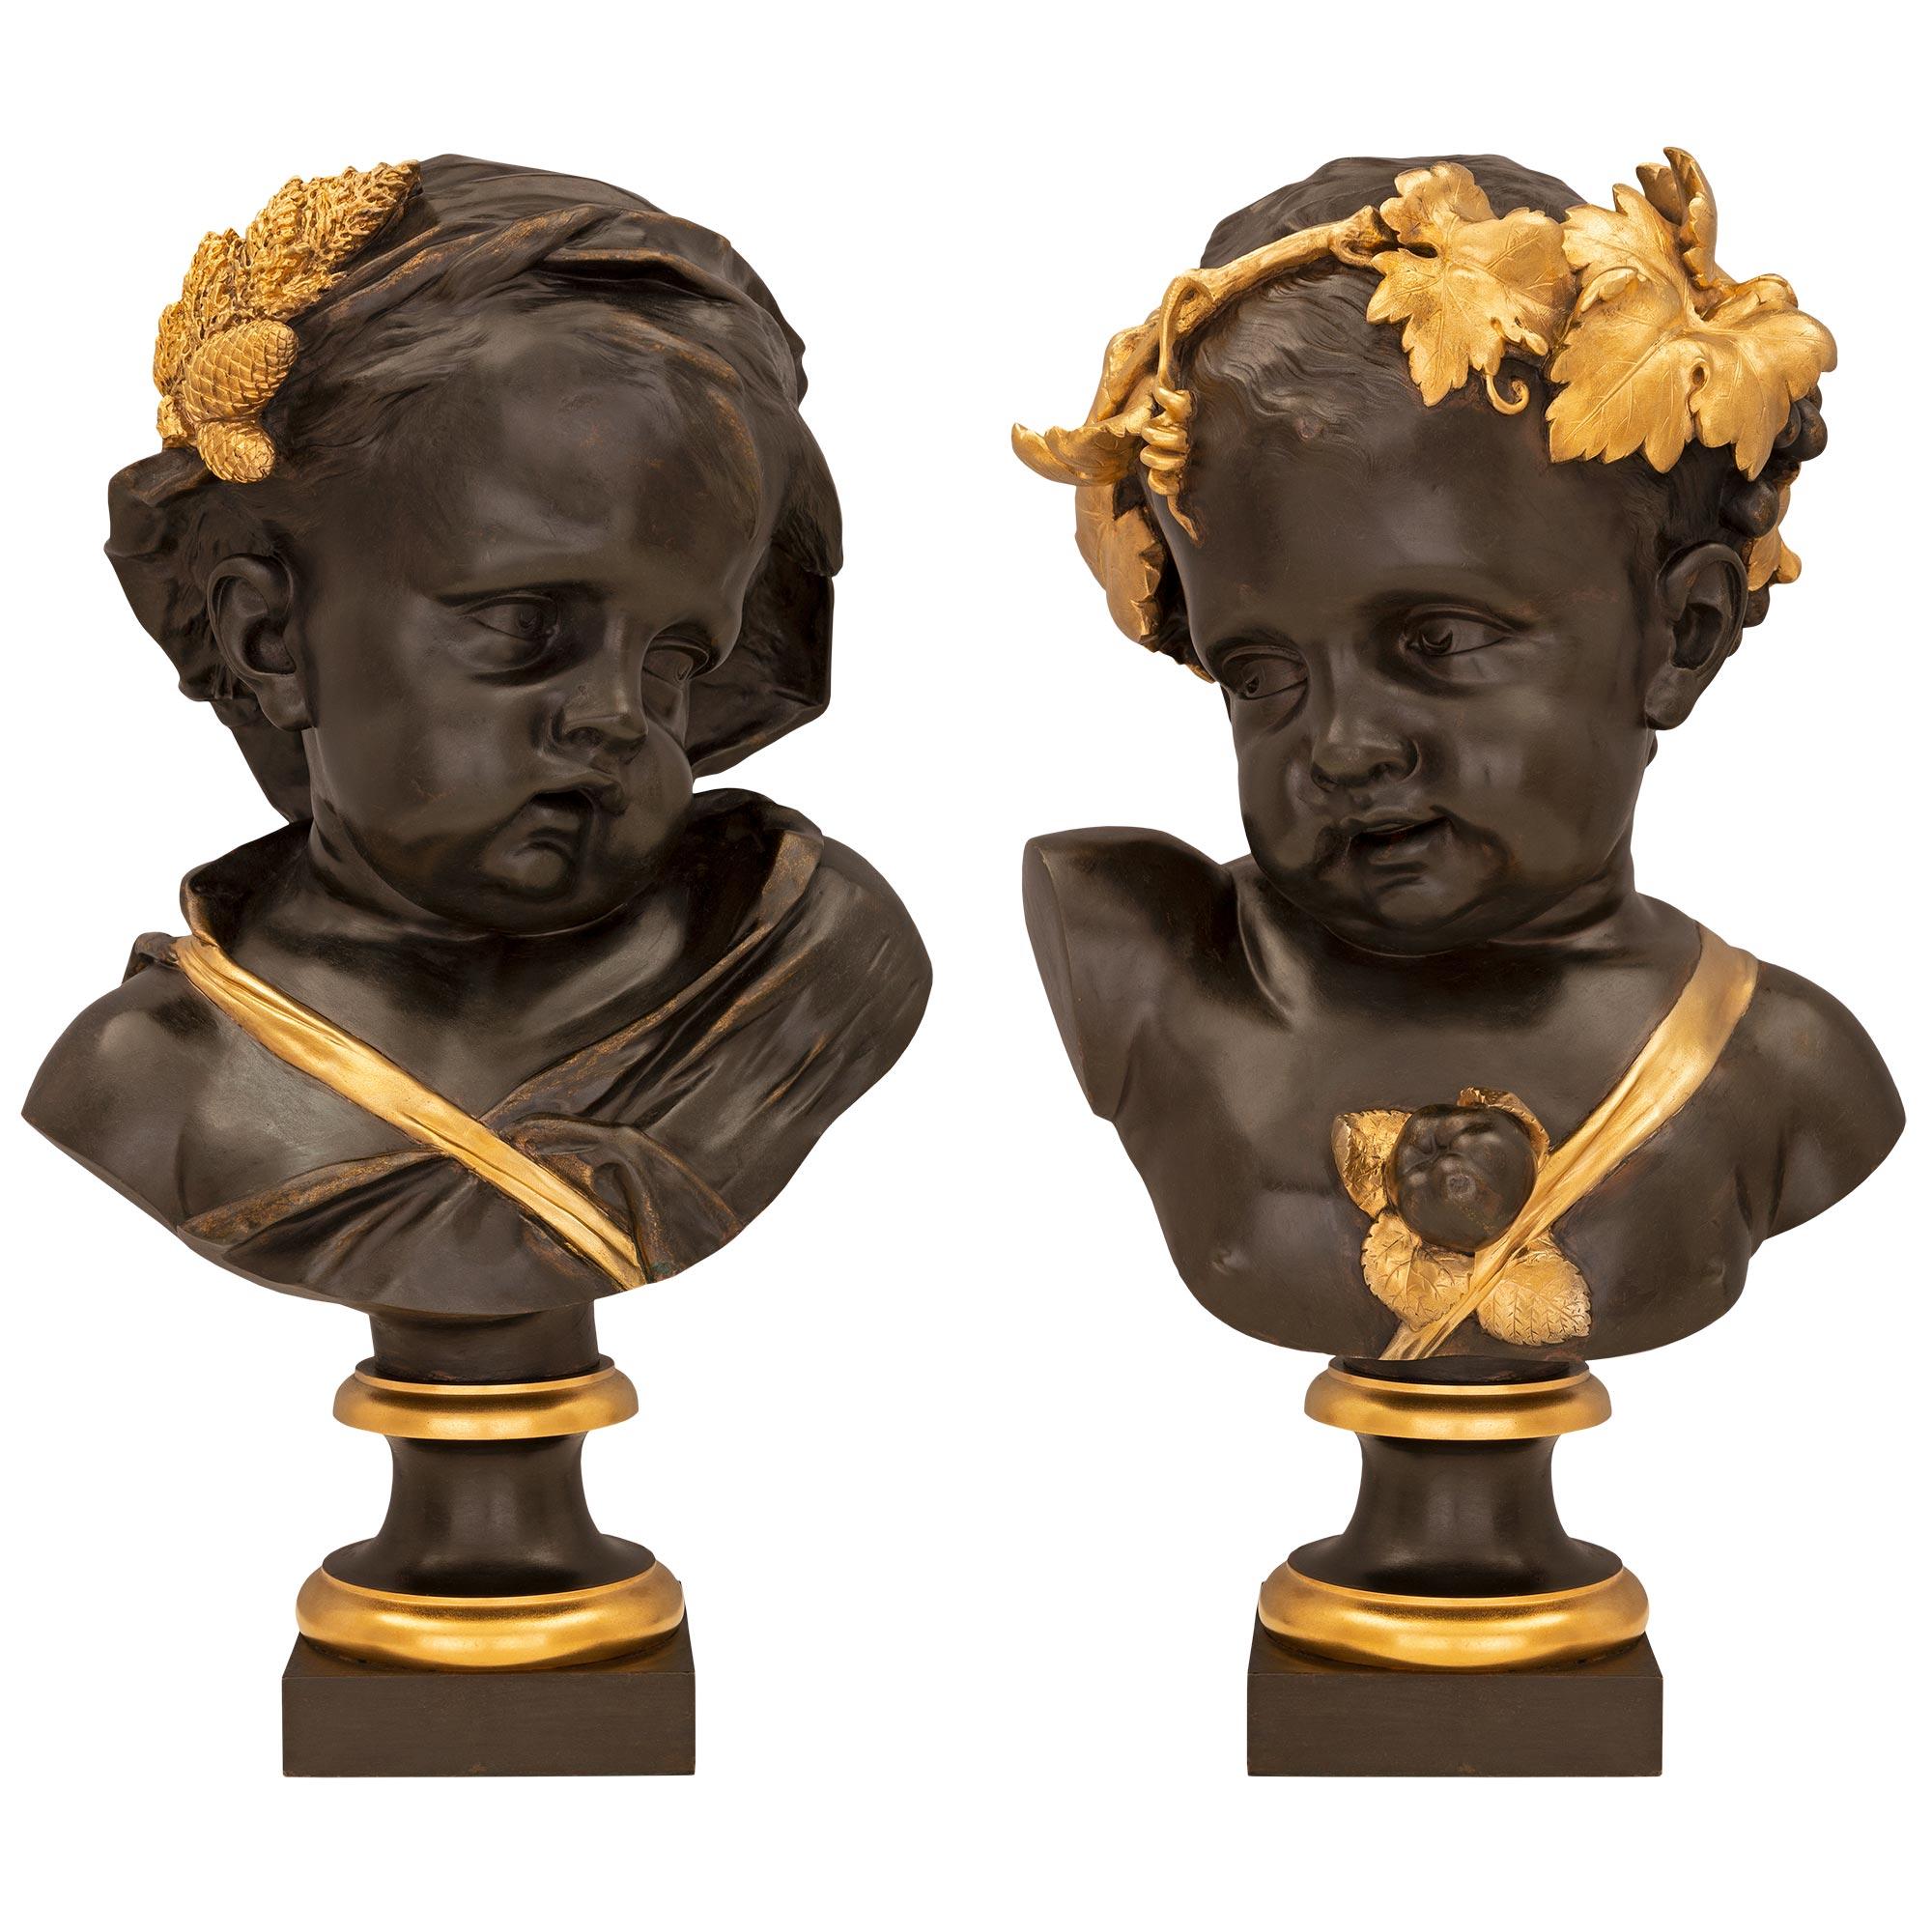 A striking and most elegant pair of French 19th century Louis XVI st. patinated bronze and ormolu cherubs busts. Each charming and high quality bust is raised on a square base with a most elegant patinated bronze and ormolu socle shape pedestal